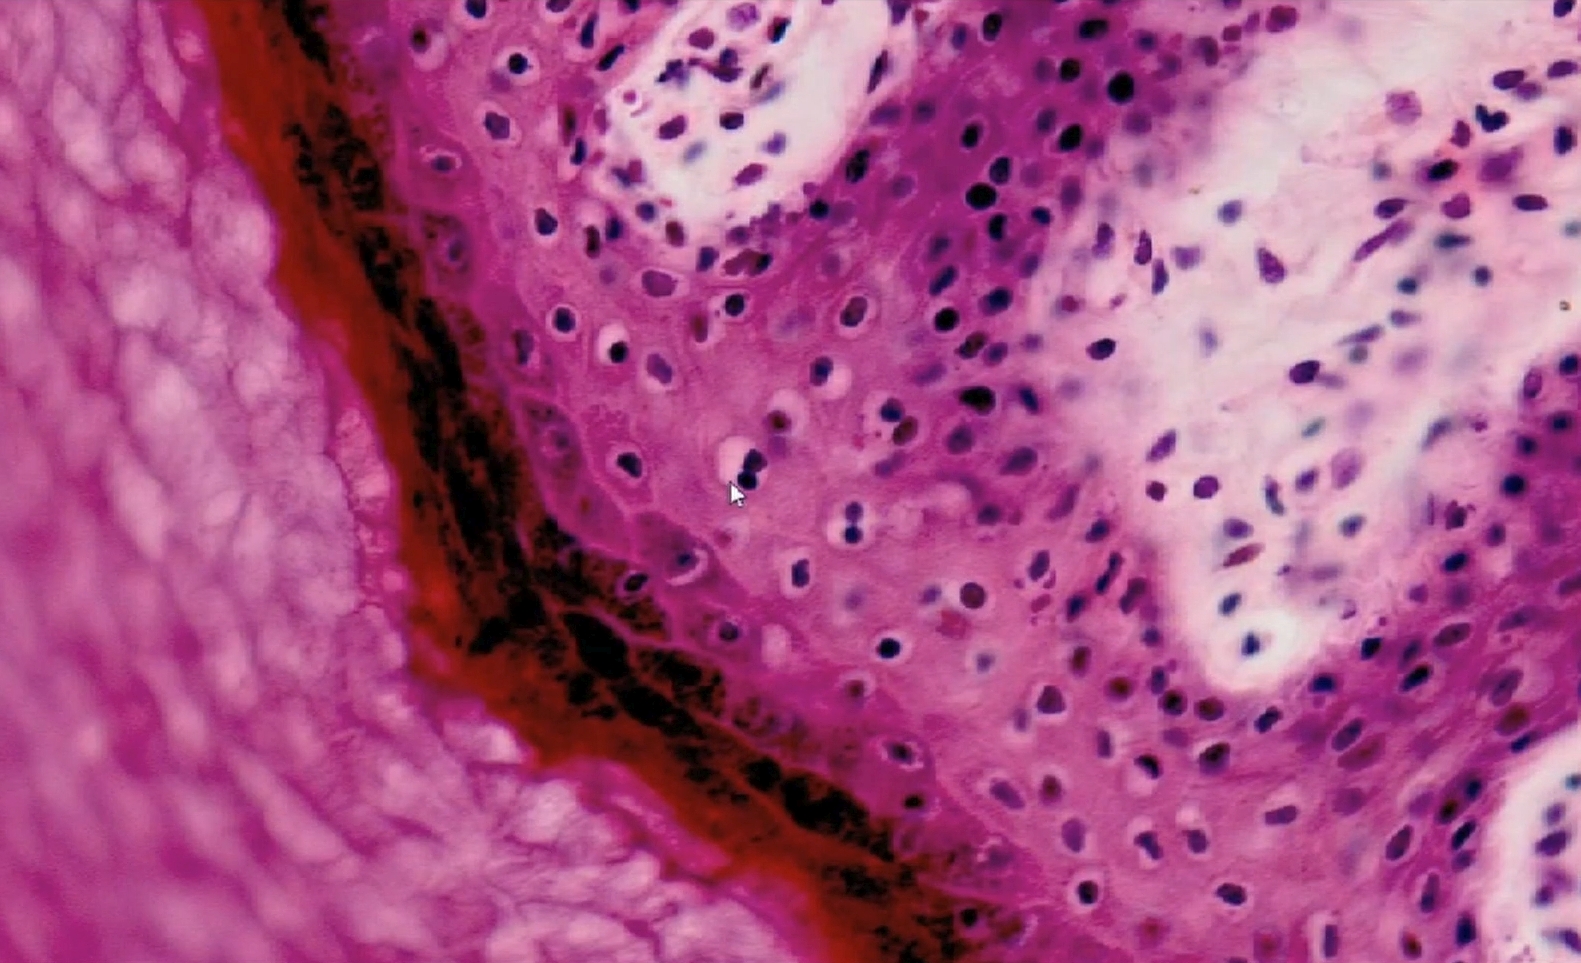 microscopic image of a histology slide